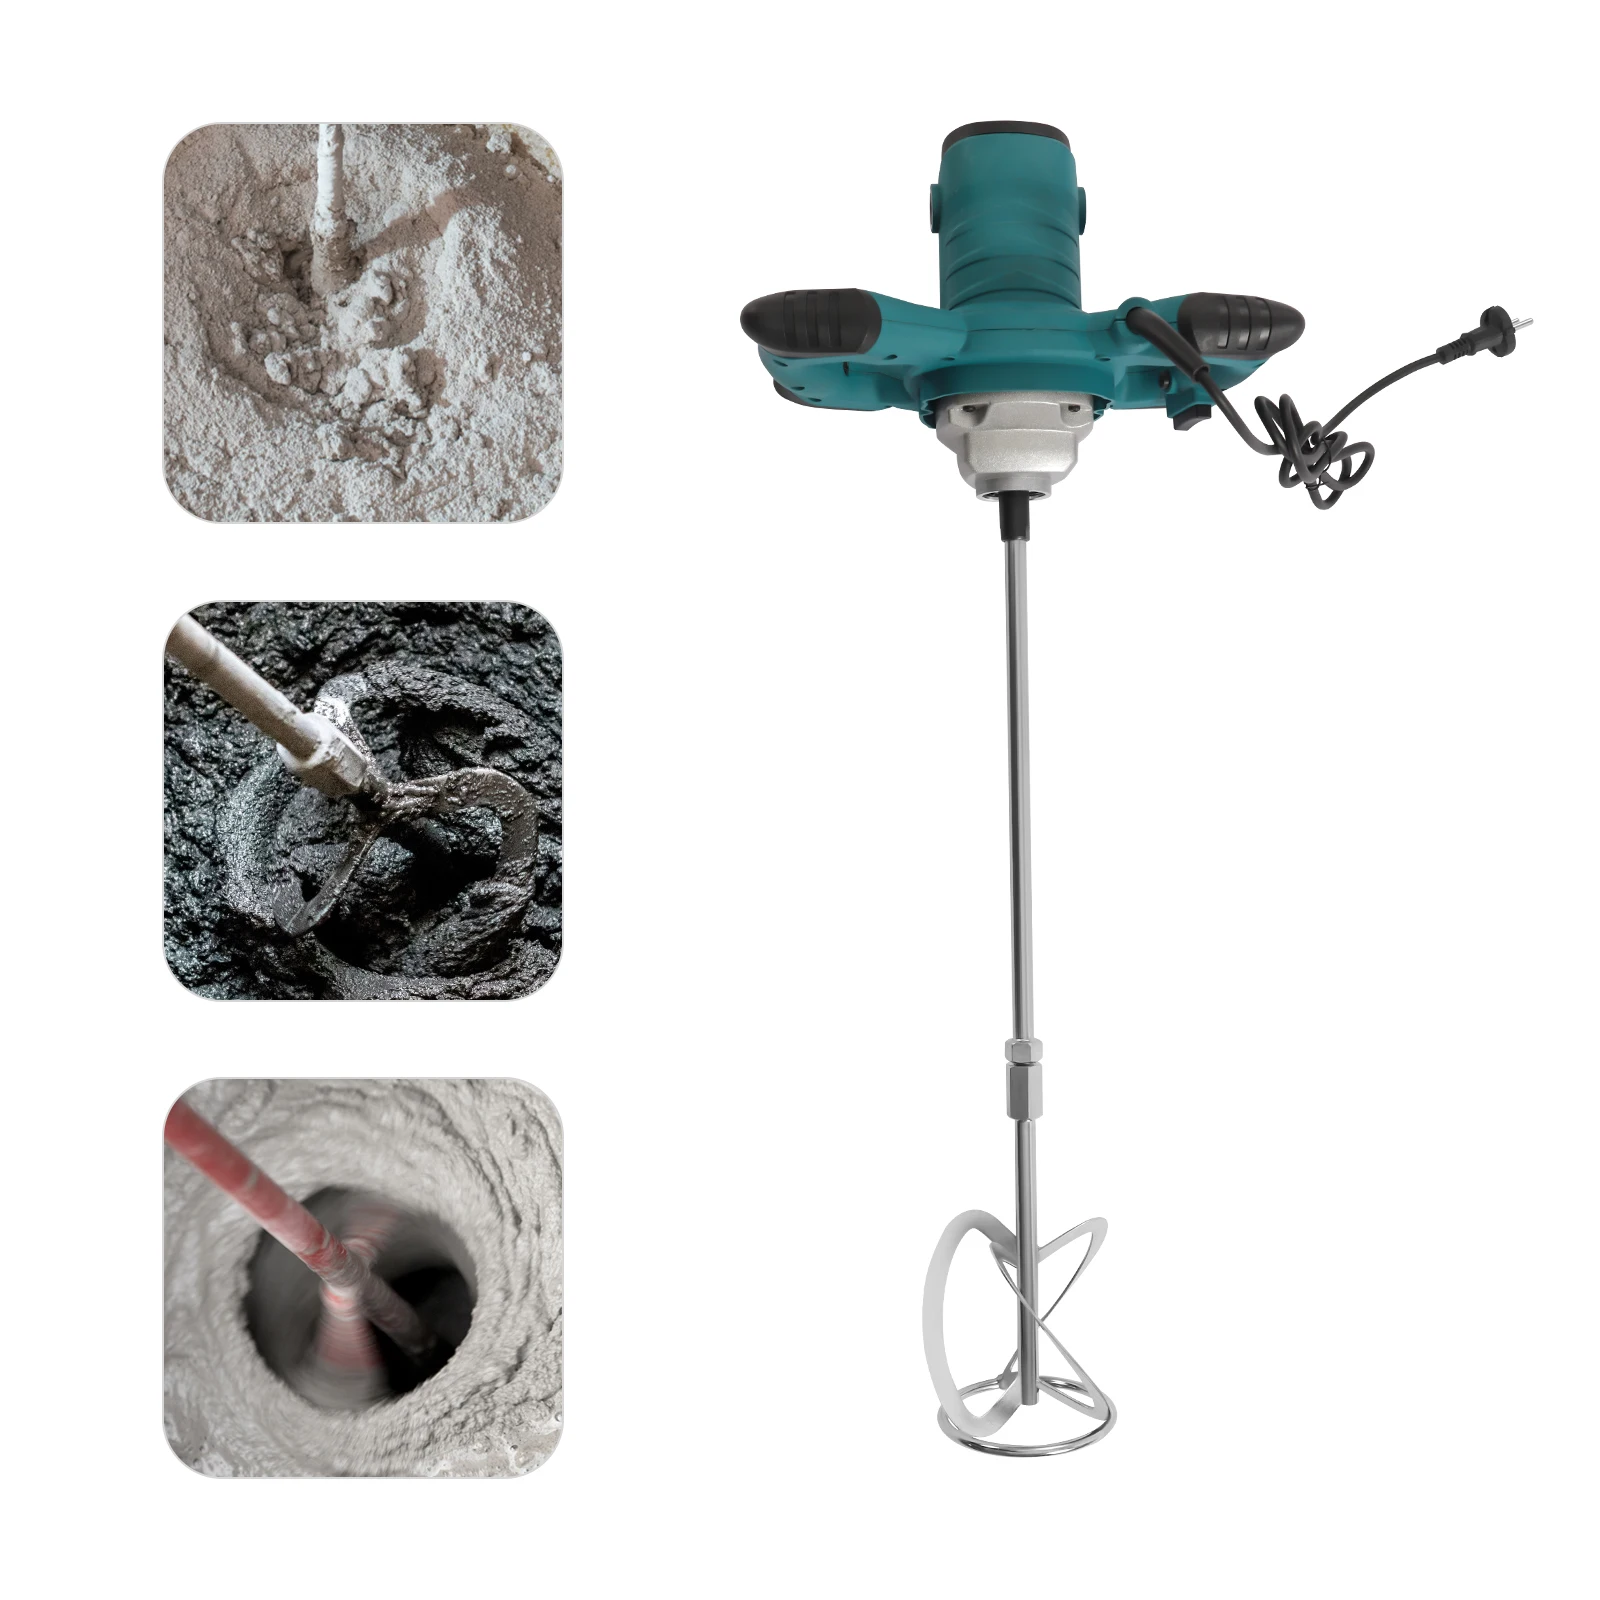 2100W Portable Electric Mud Mixer Wear-resistant Concrete Mixer Machine 2600w electric concrete mixer portable cement mixer mortar grout plaster paint stirring tool 6 speeds adjustable